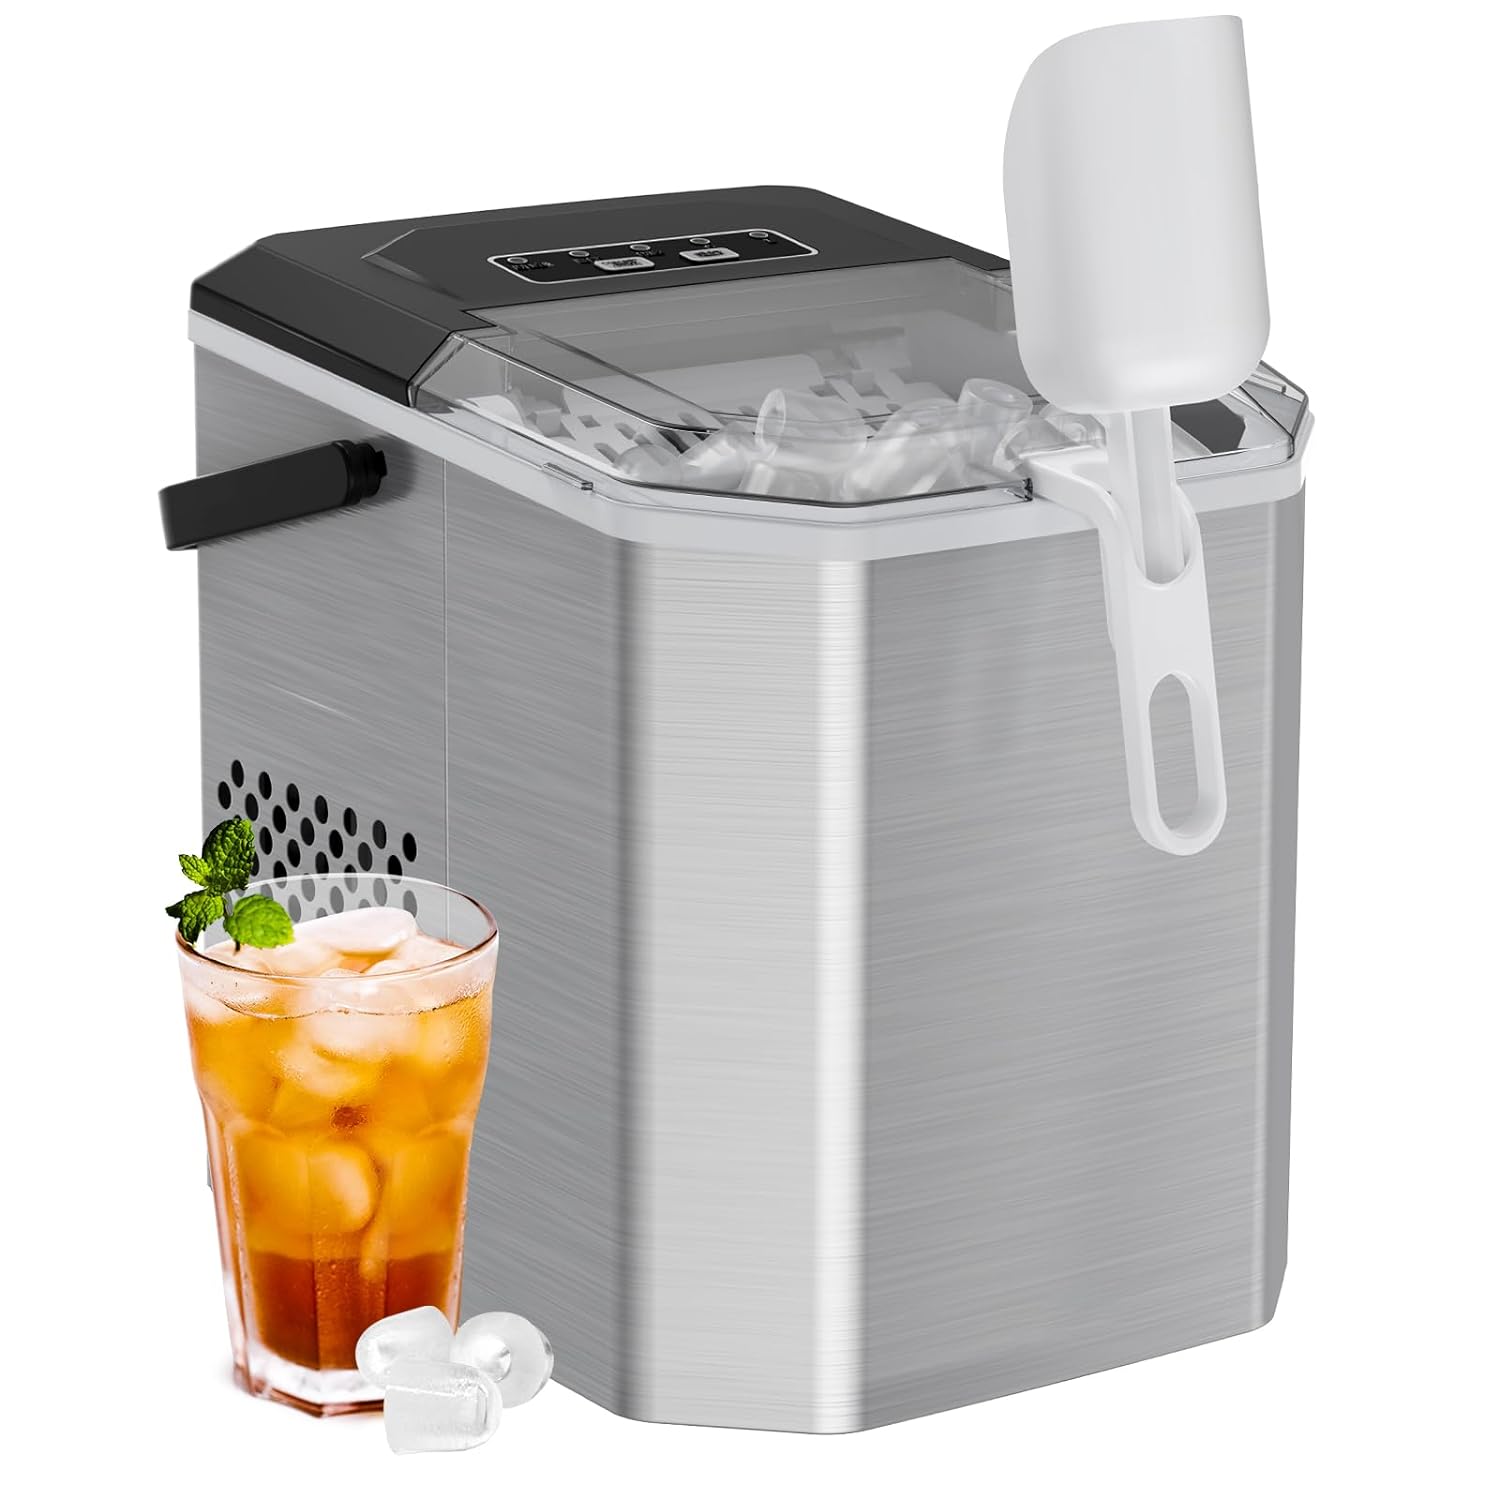 Great personal ice maker, purchased this for a pole barn cabin where we only have a mini fridge with a freezer compartment the size of an egg carton, just not as long.Pros:Makes ice fairly quickly.The controls are easy to read and the low water indicator is great so you dont have to keep checking.Compact, easy to store, nice design.Ice basket comes out, making the scooper just an added item that most probably wouldnt use, but nice to have in times you would.I have only used the large size ic